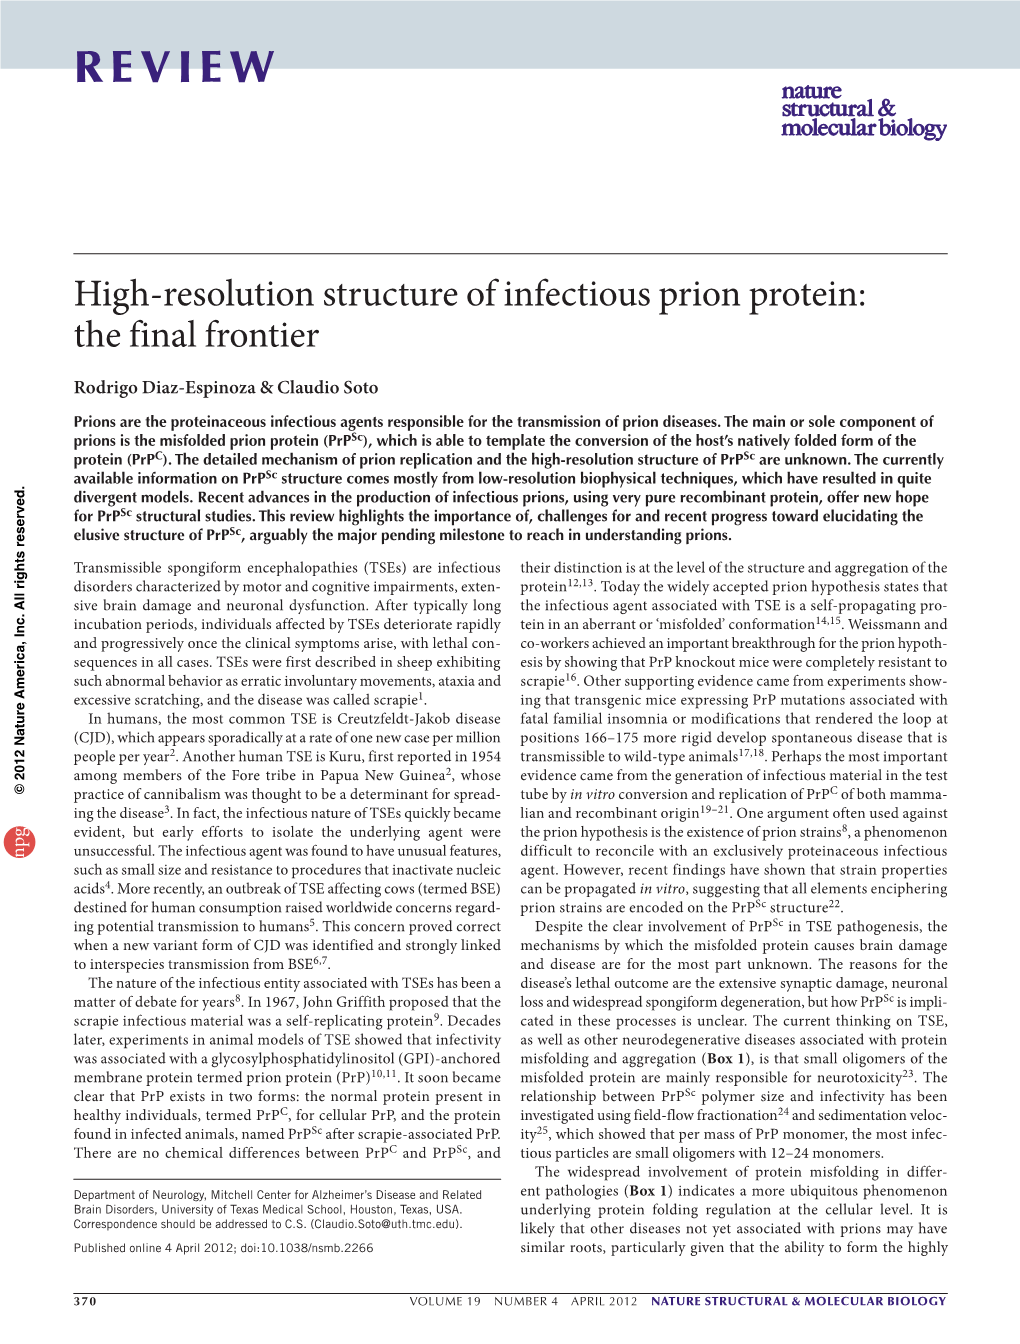 High-Resolution Structure of Infectious Prion Protein: the Final Frontier